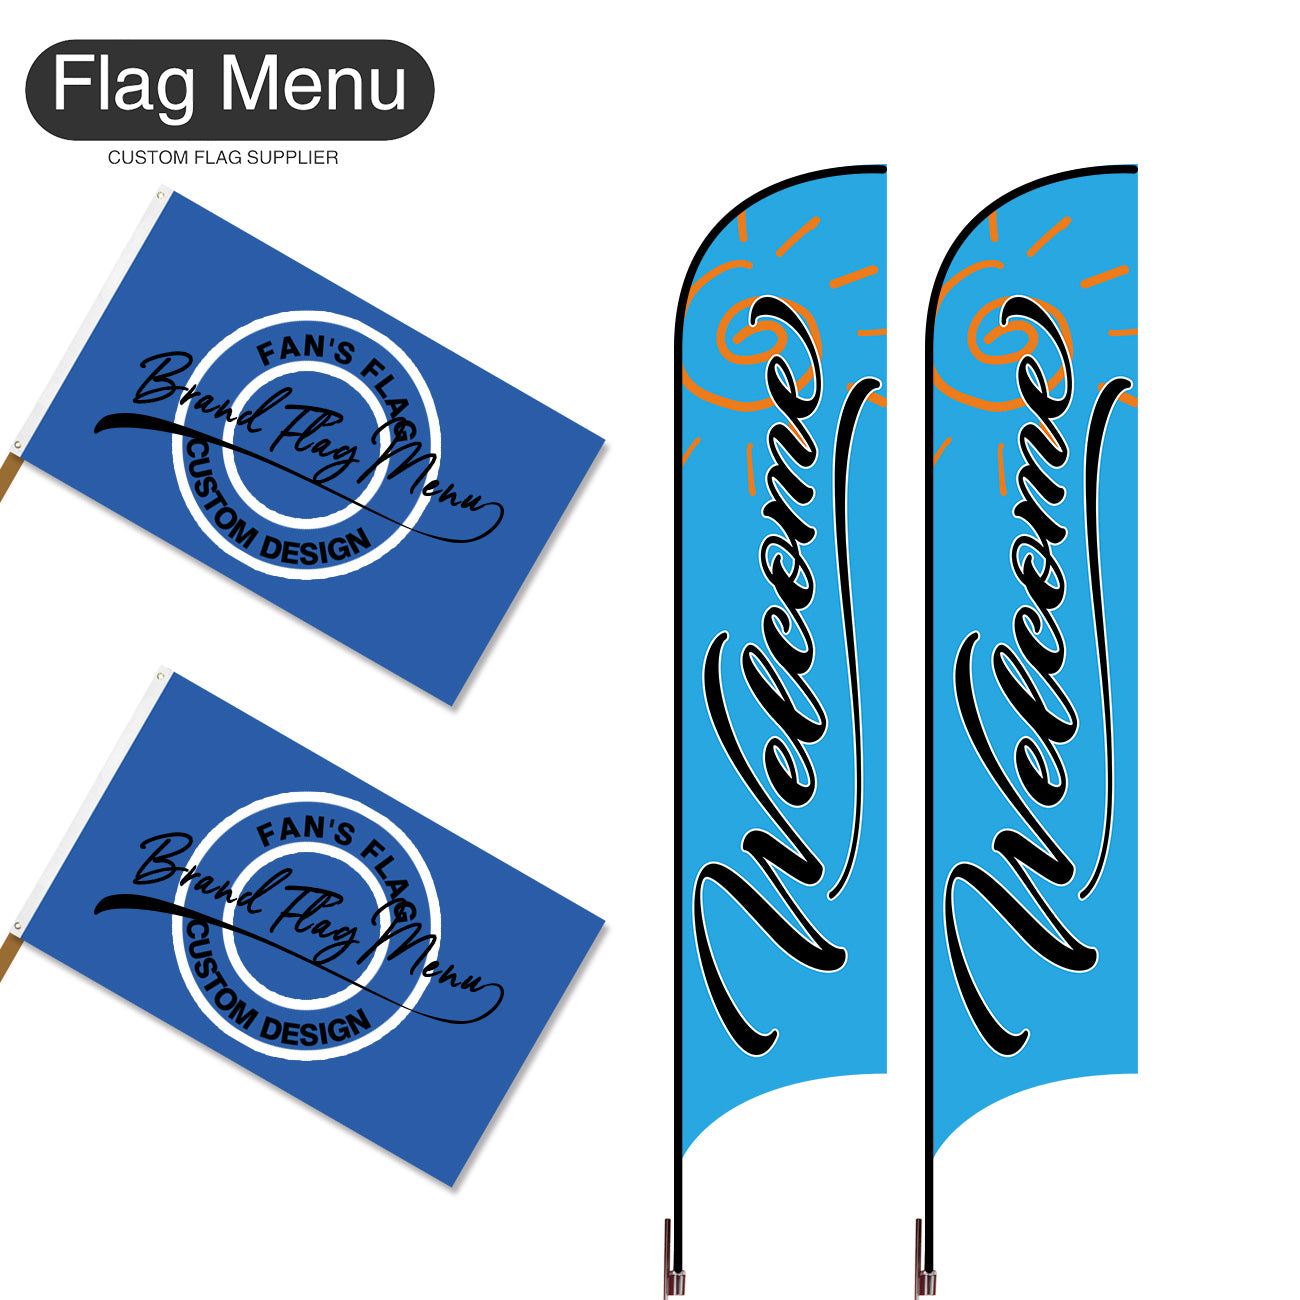 Outdoor Advertising Set - D-Blue B-S - Feather Flag -Double Sided & 3'x5' Regular Flag -Single Sided-Cross & Water Bag-Flag Menu